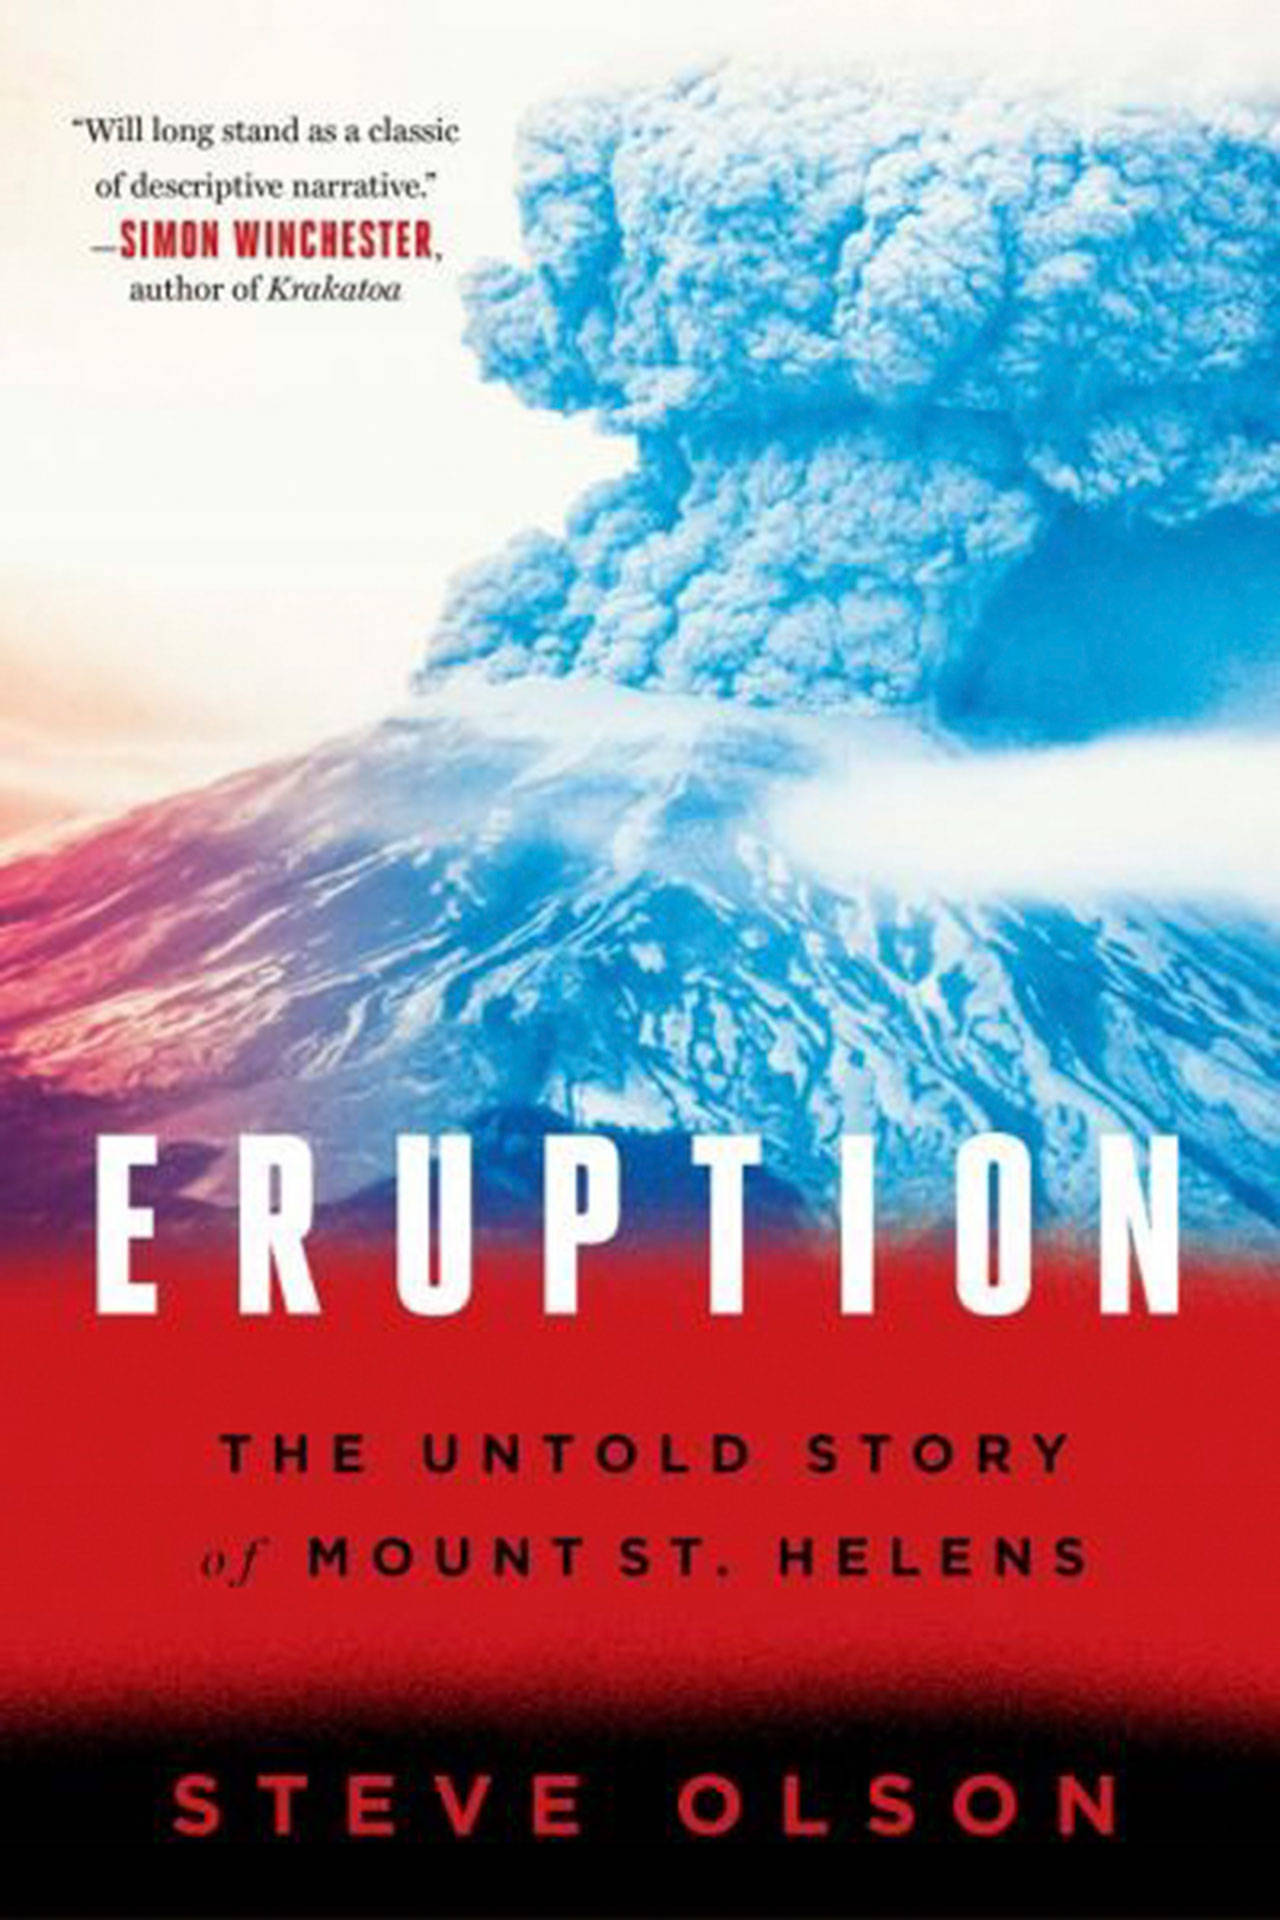 Image courtesy of Eagle Harbor Book Company | At 6:30 p.m. Thursday, May 25, Steve Olson will visit the shop to talk about his new book “ Eruption: The Untold Story of Mount St. Helens.”